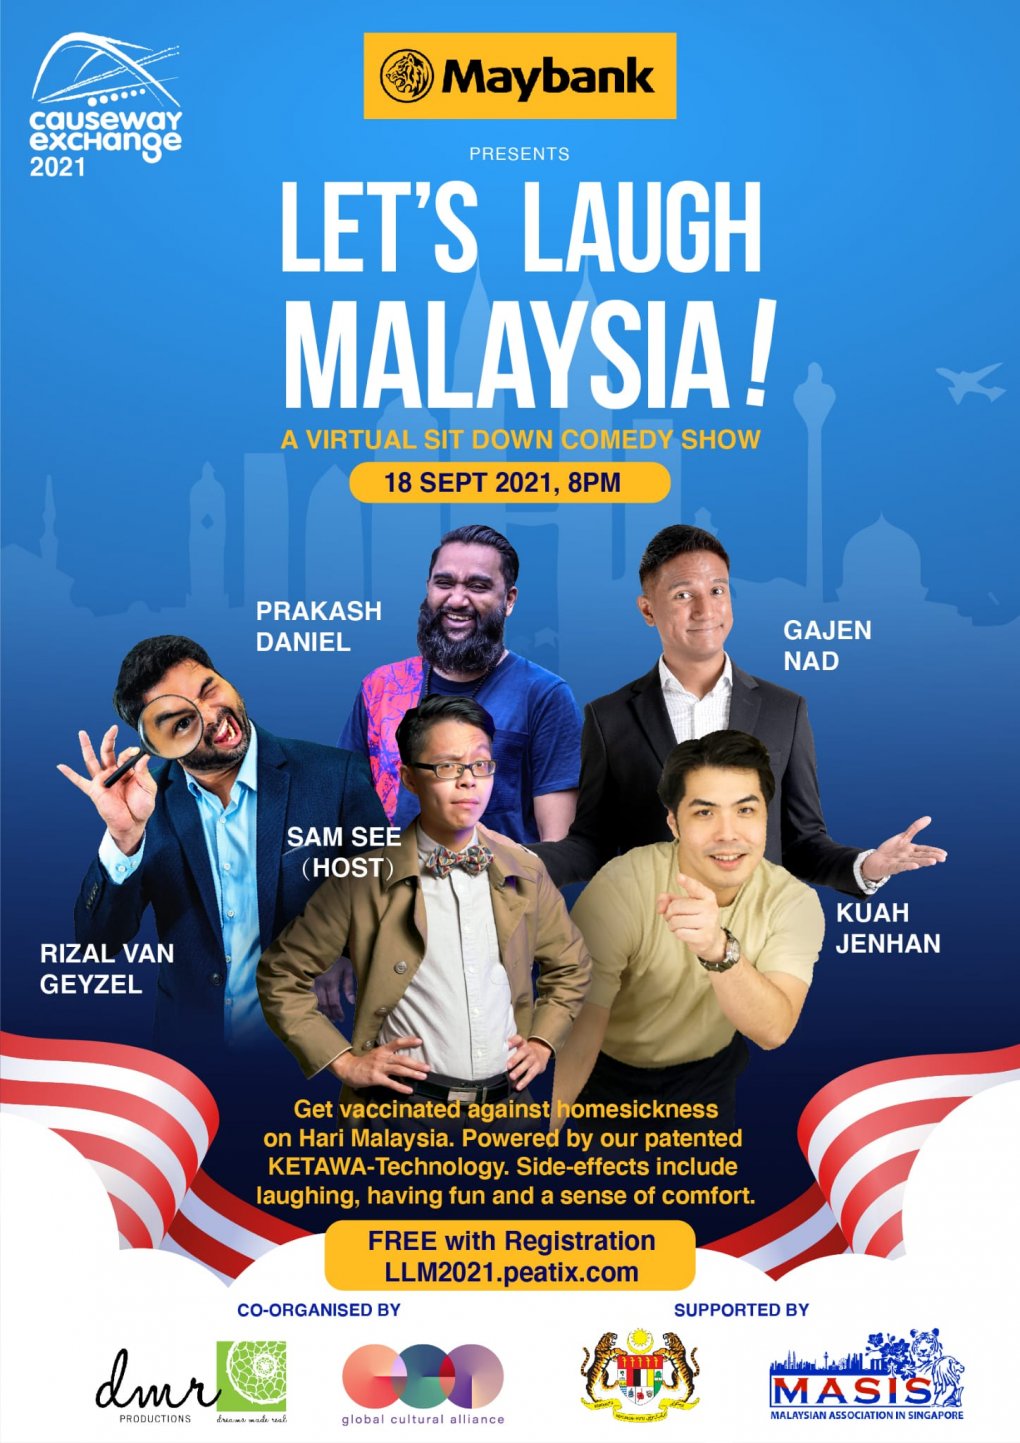 LET’S LAUGH MALAYSIA